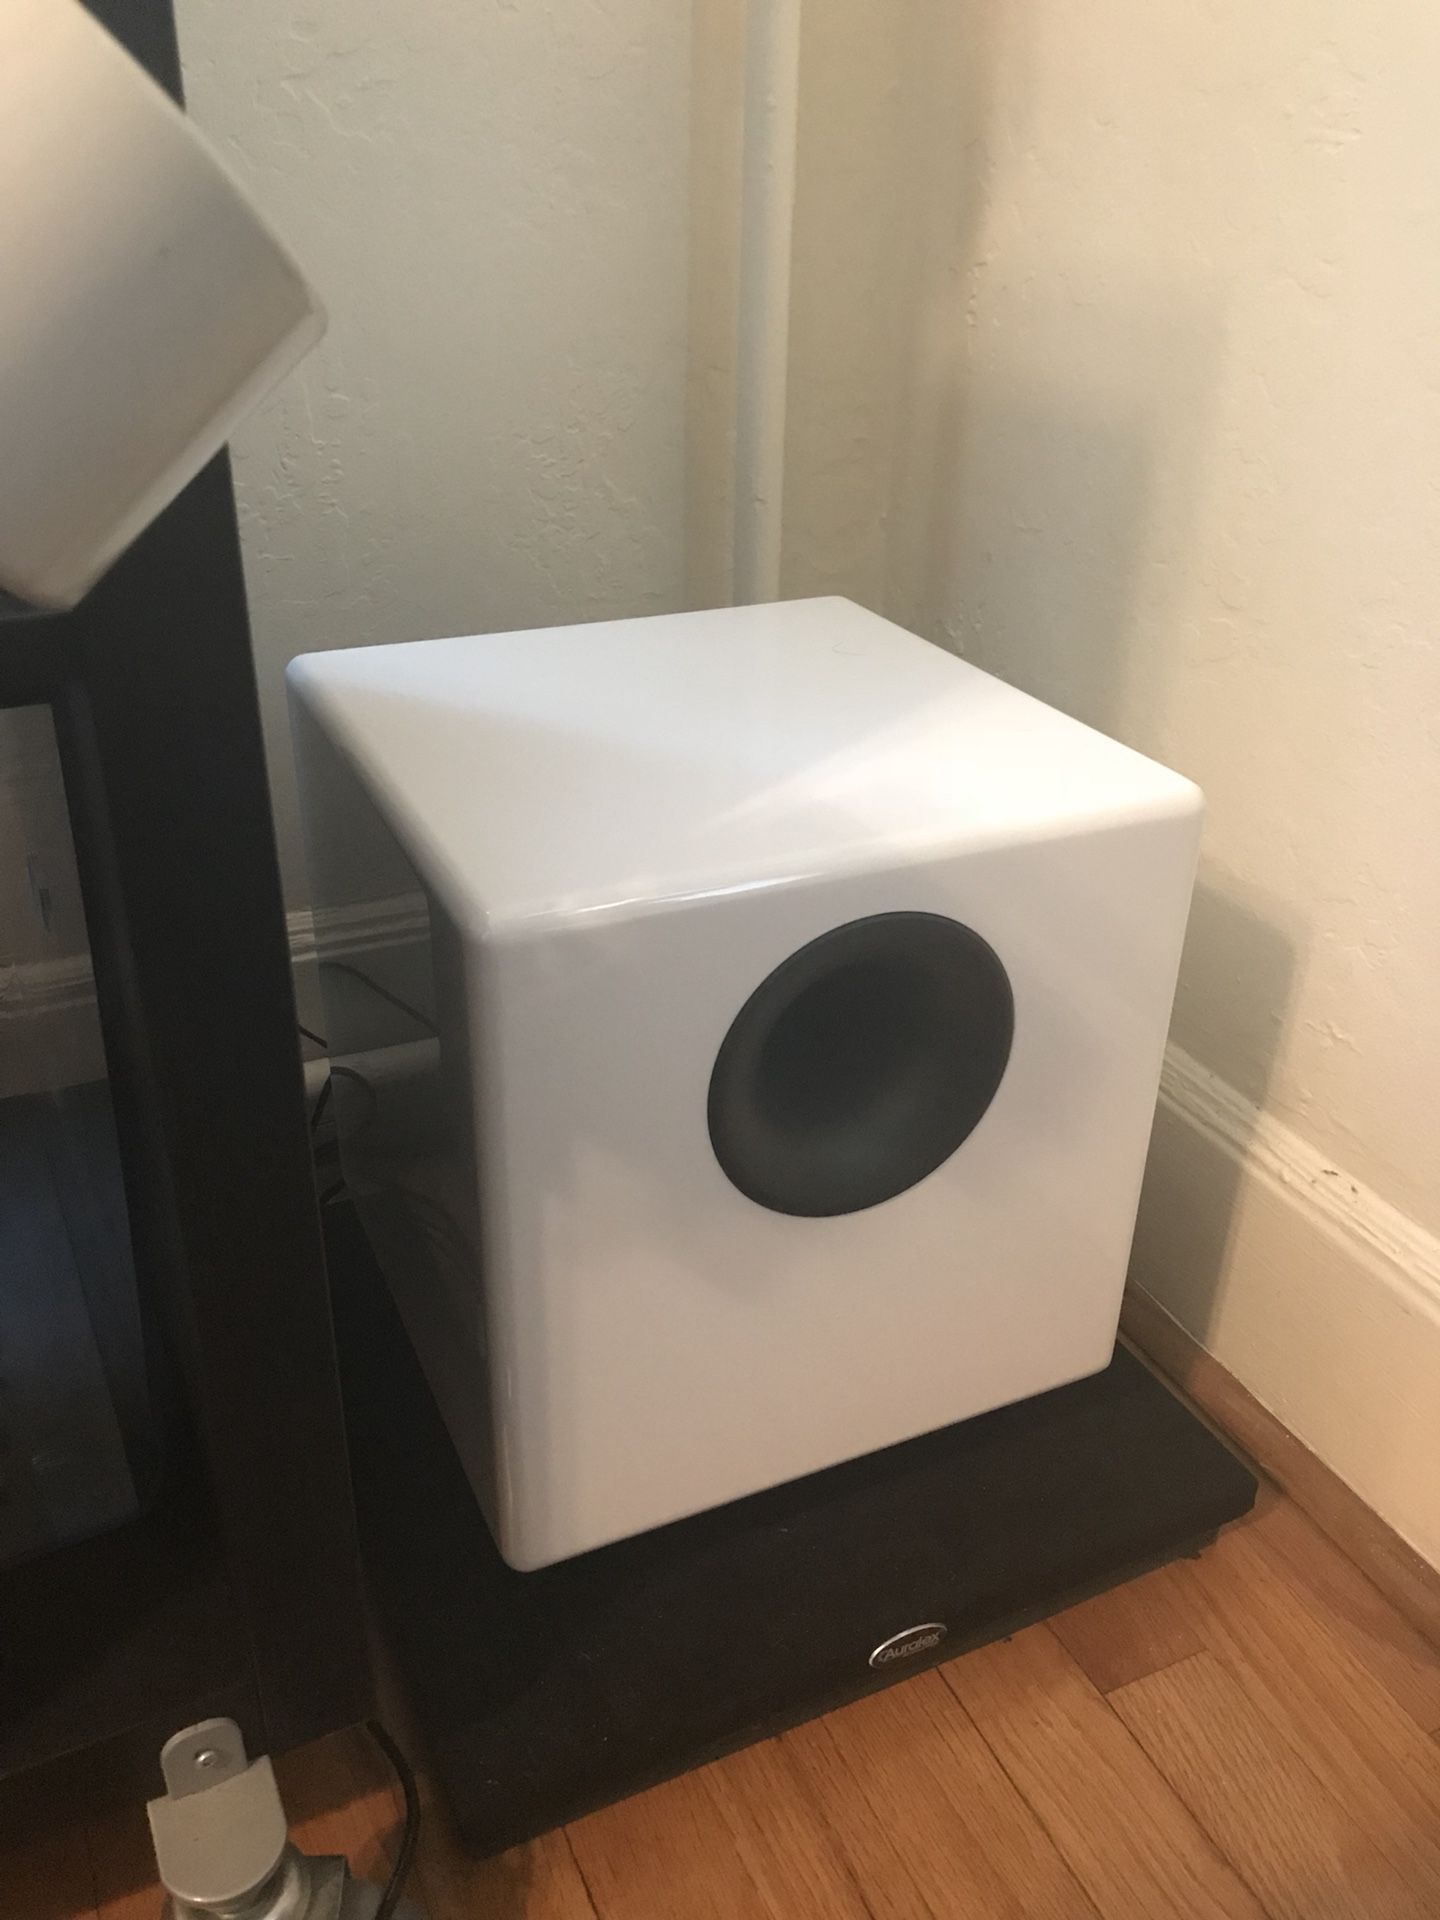 Audioengine s8 powered subwoofer for Sale in Seattle, WA - OfferUp